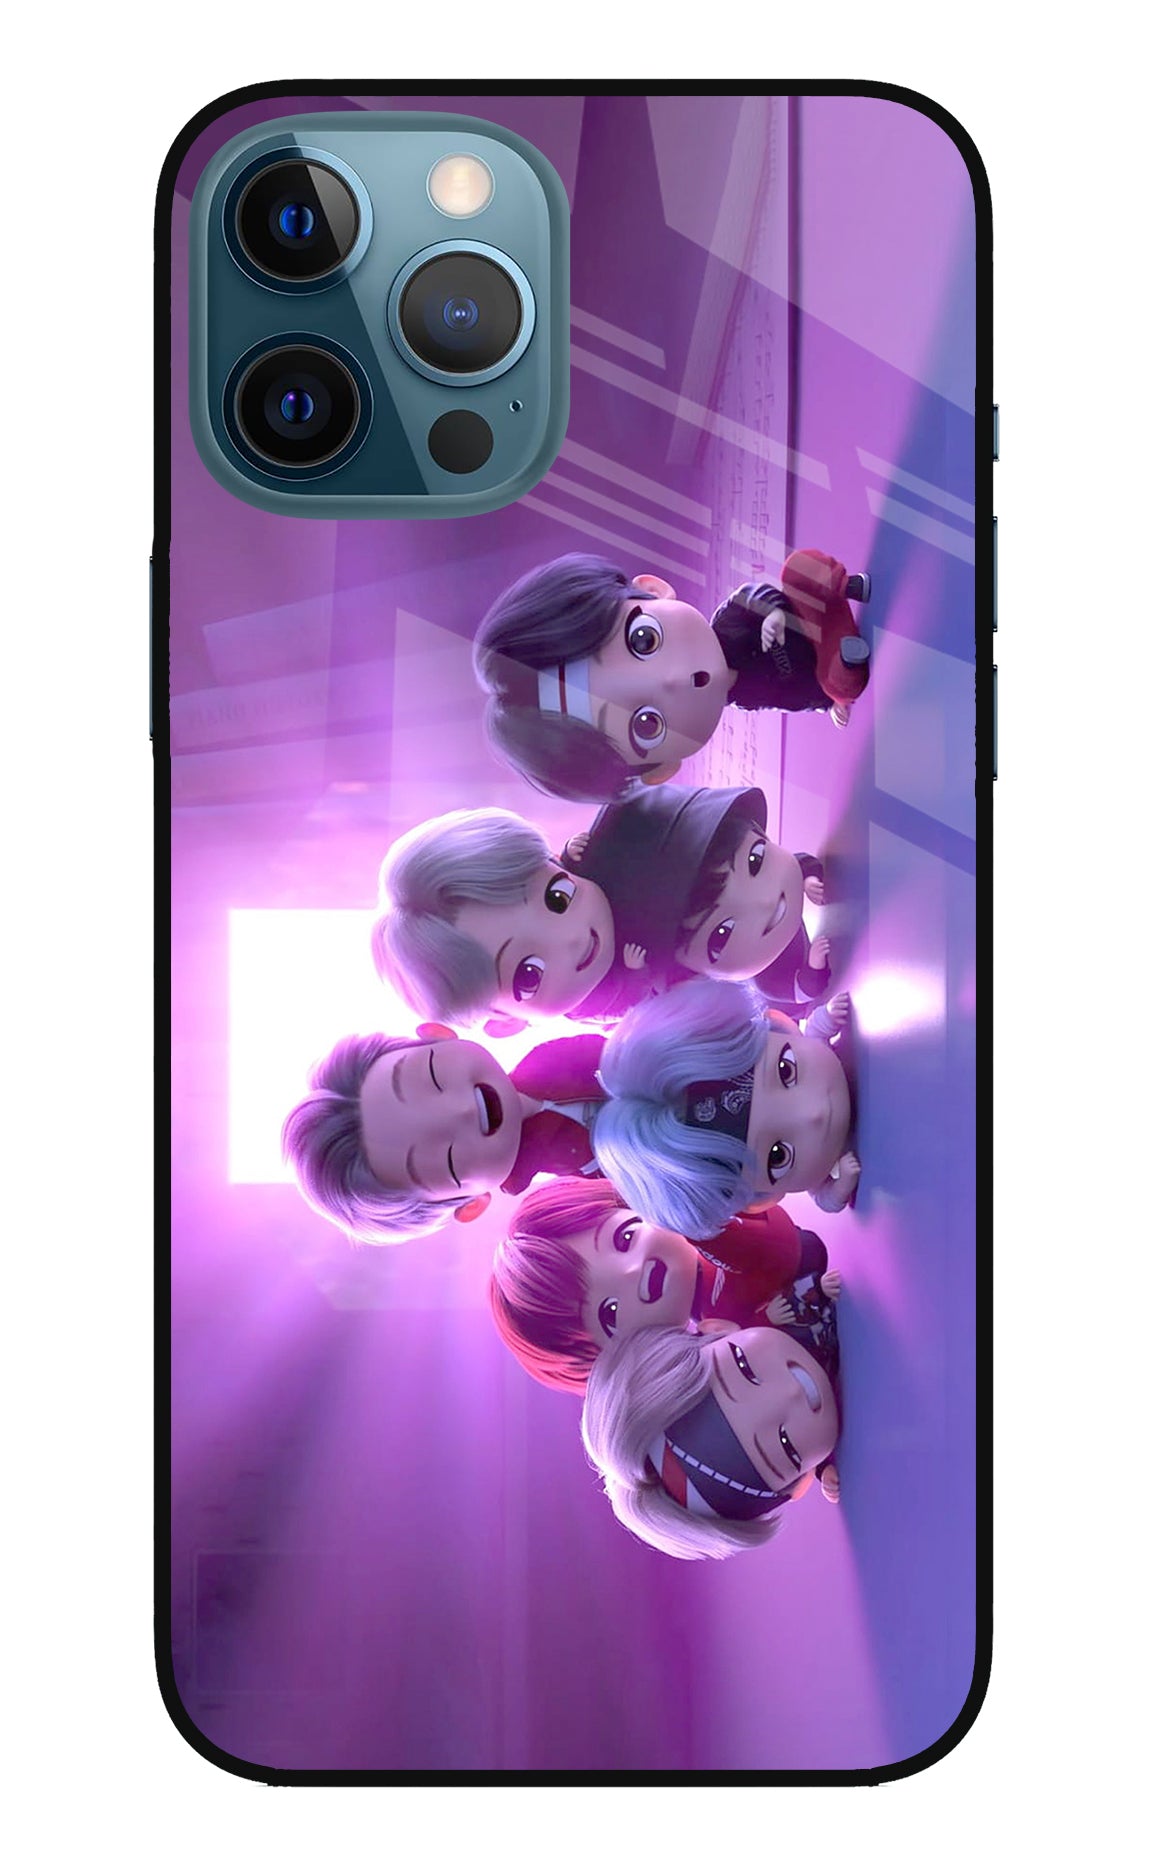 BTS Chibi iPhone 12 Pro Max Back Cover